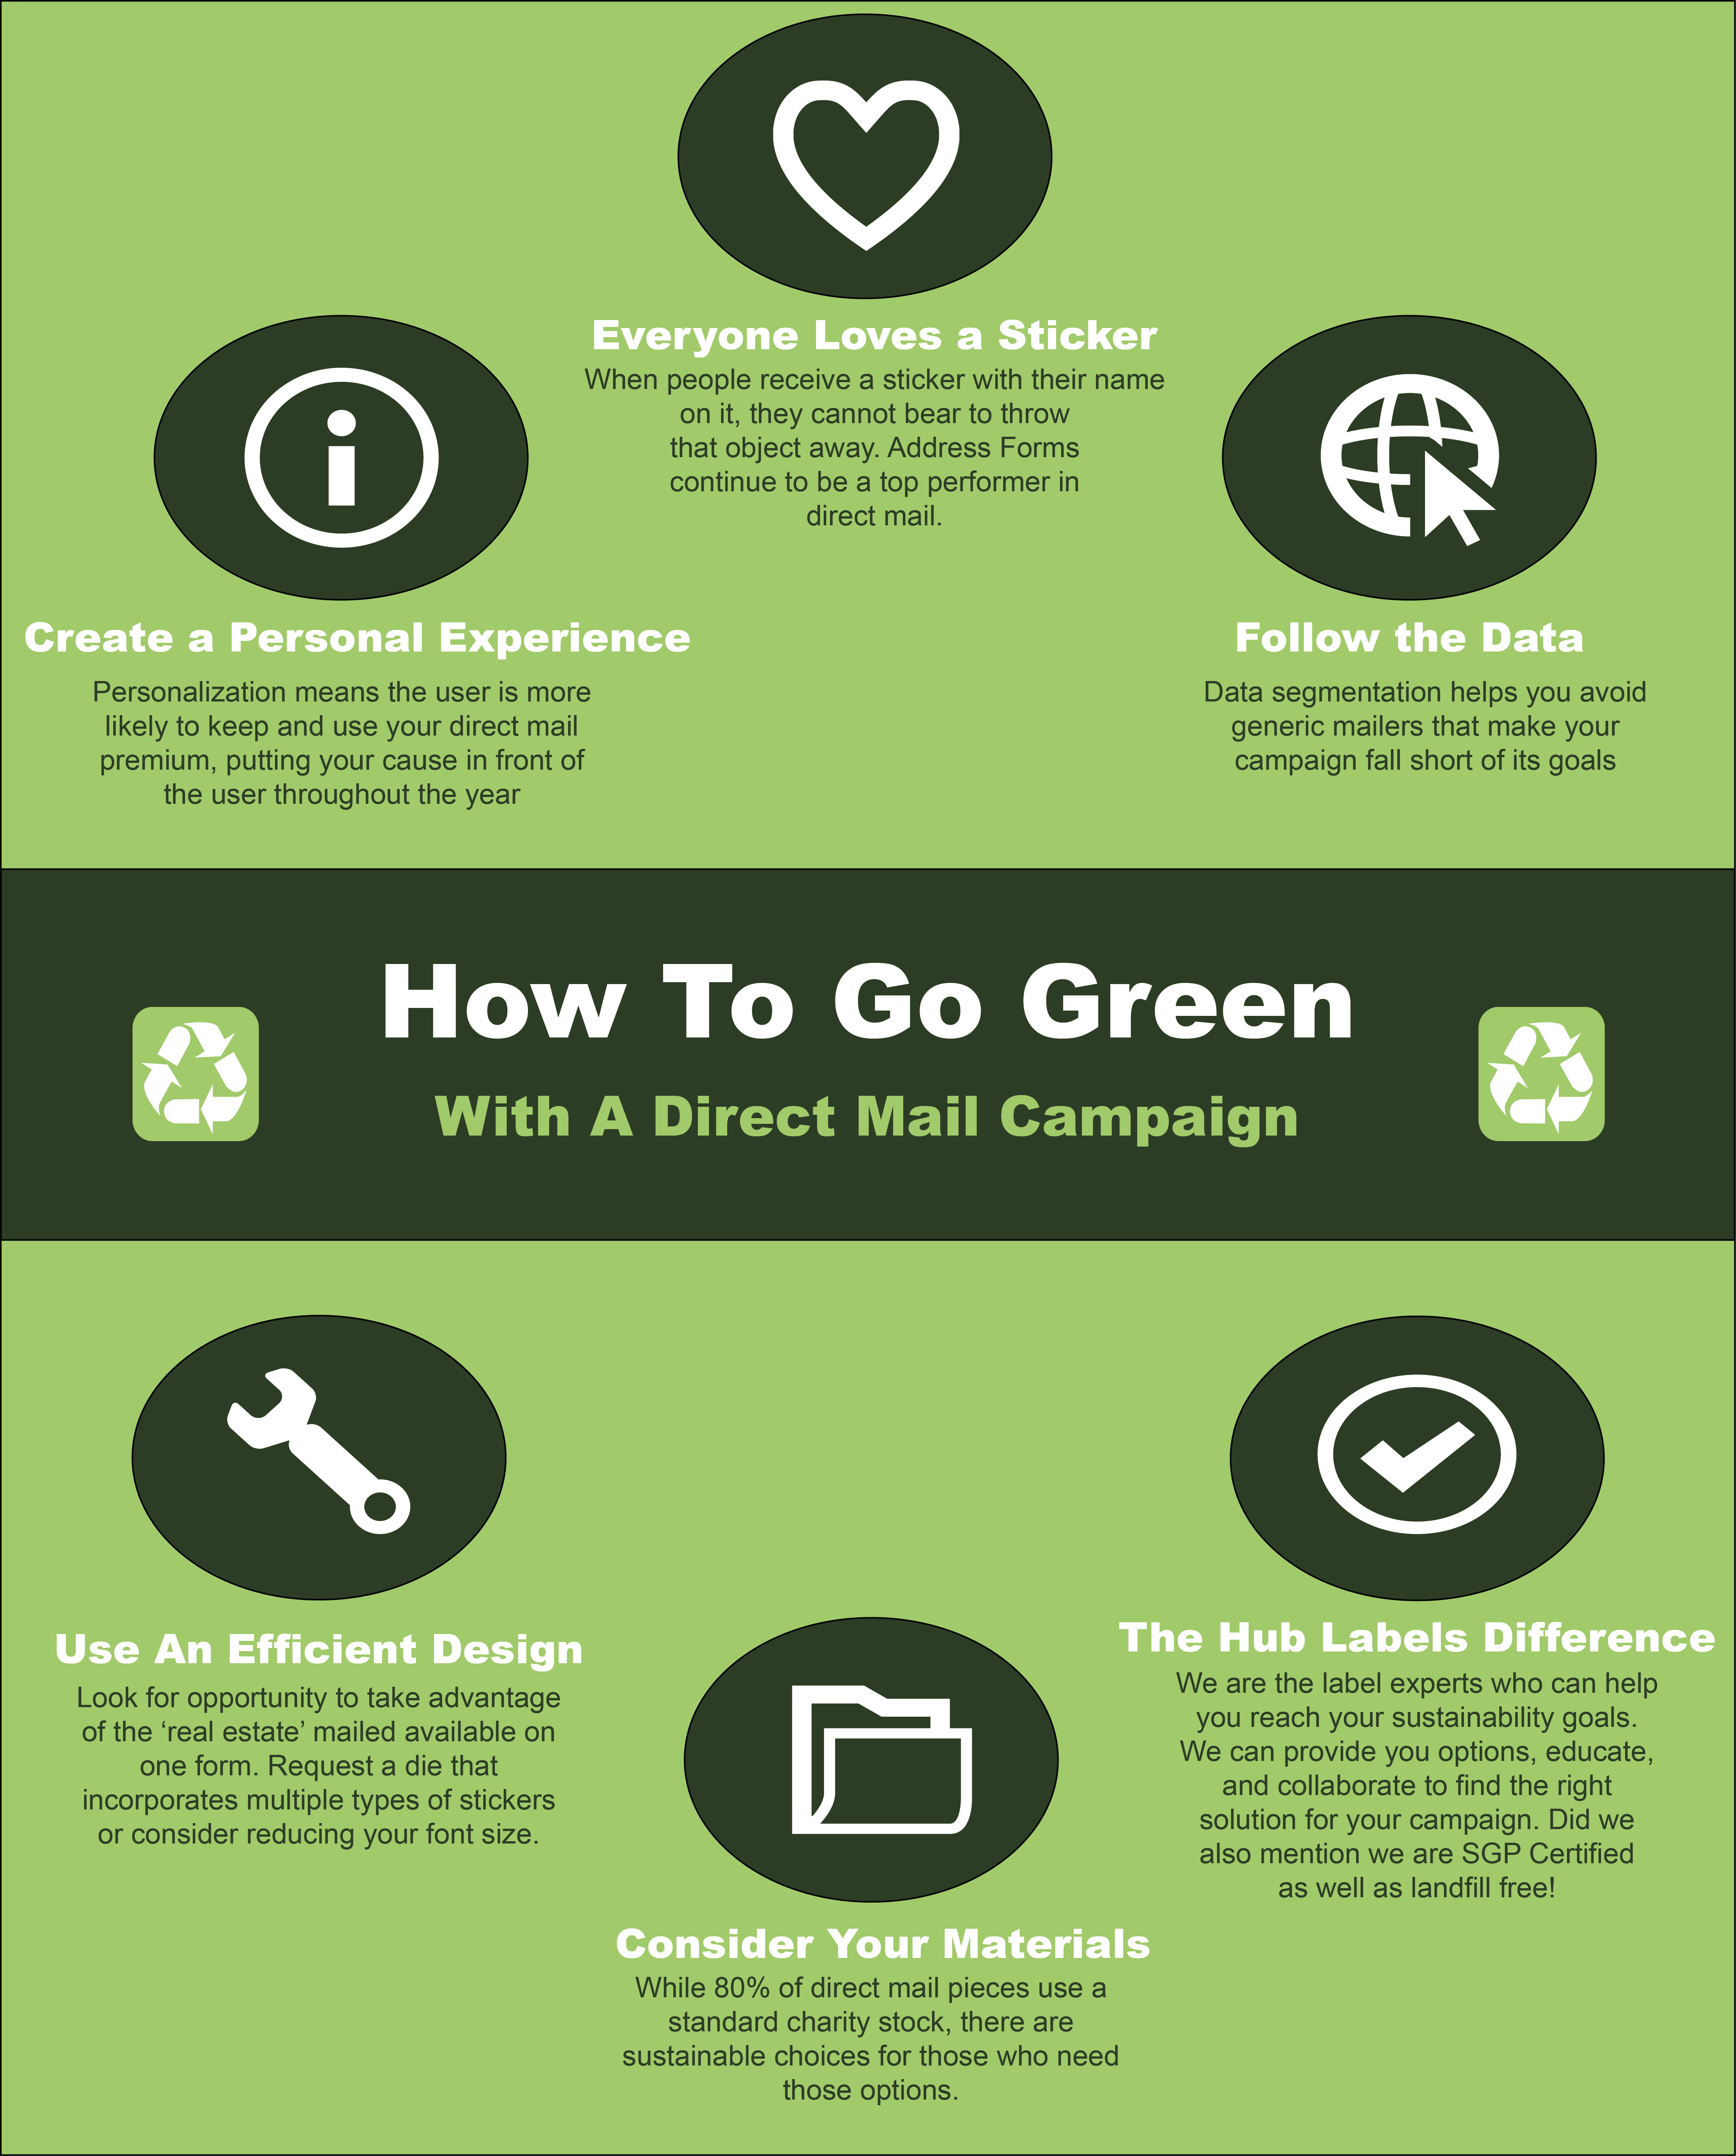 "Go Green" In Direct Mail